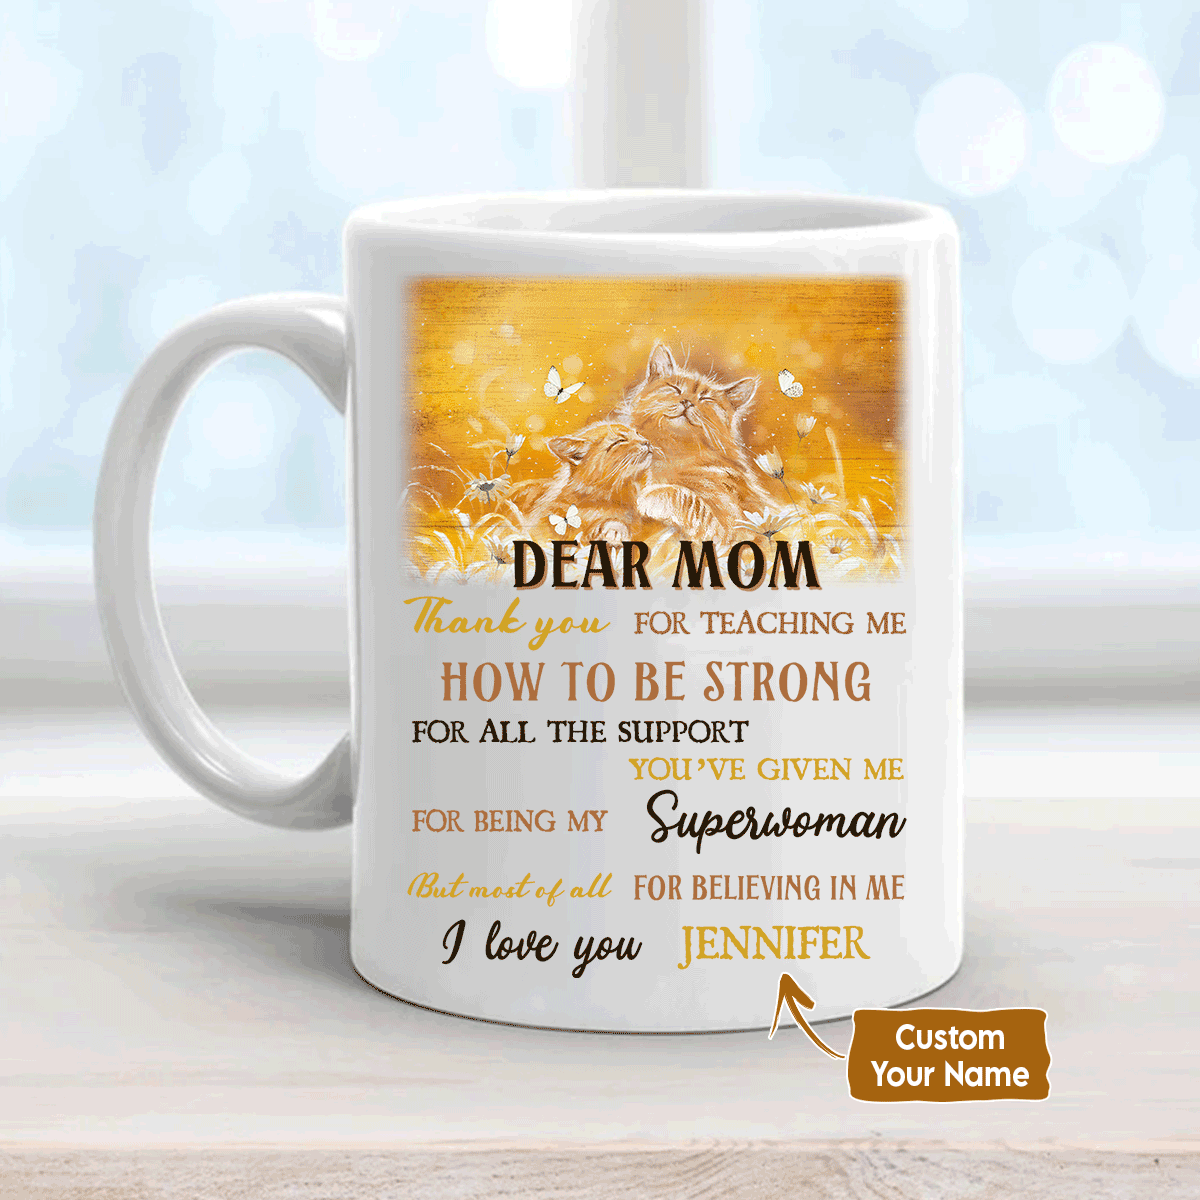 Gift For Mom Personalized Mug-Daughter to mom, Cute cat family, Daisy Mug-Custom Gift For Mother's Day, Presents for Mom-Thank you for teaching me Mug